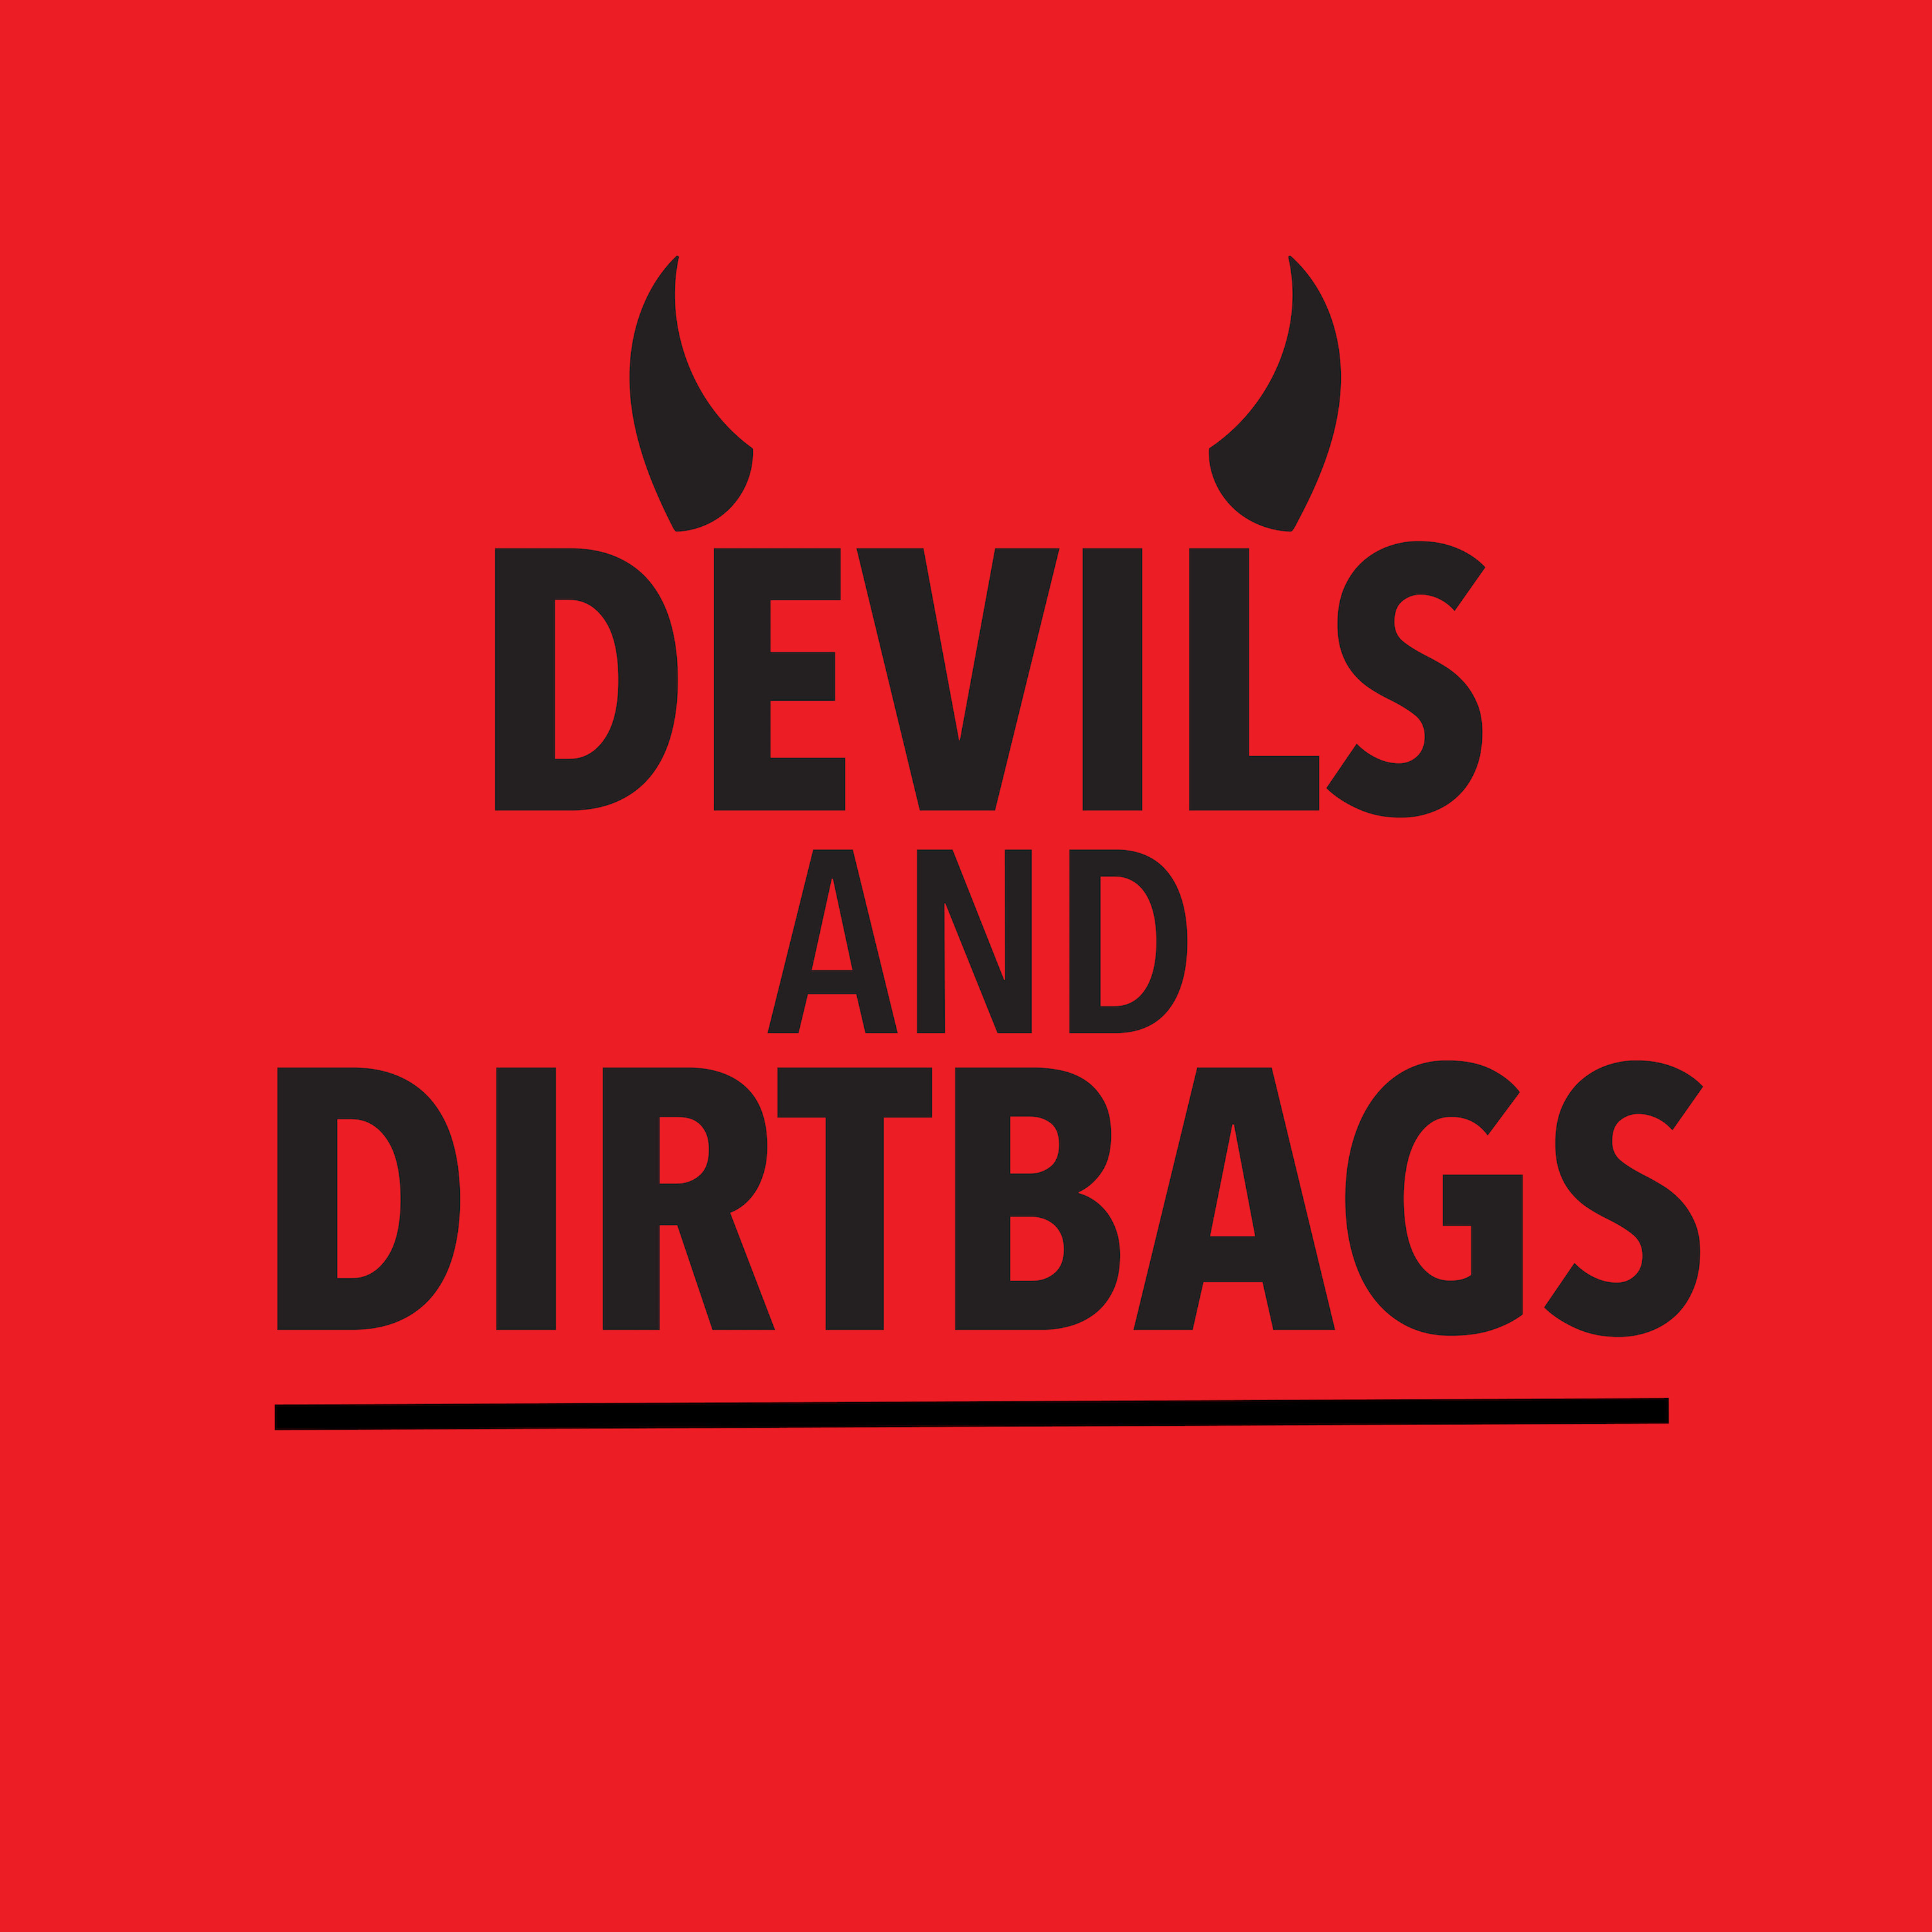 Devils and Dirtbags